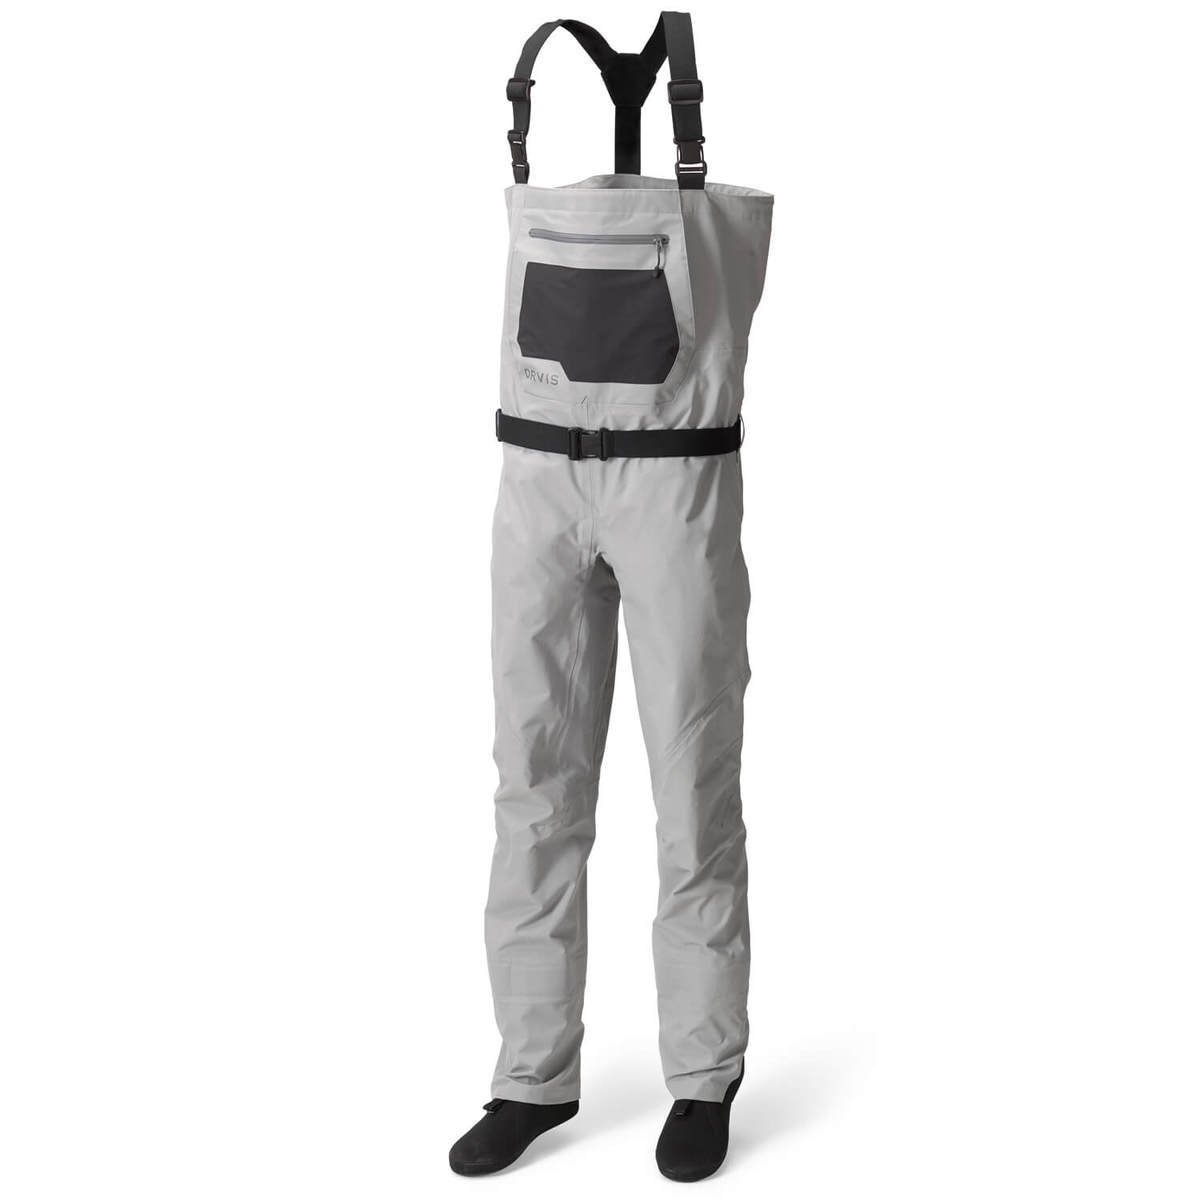 Ultra-light nylon waders fishing fork men's waders water shoes one